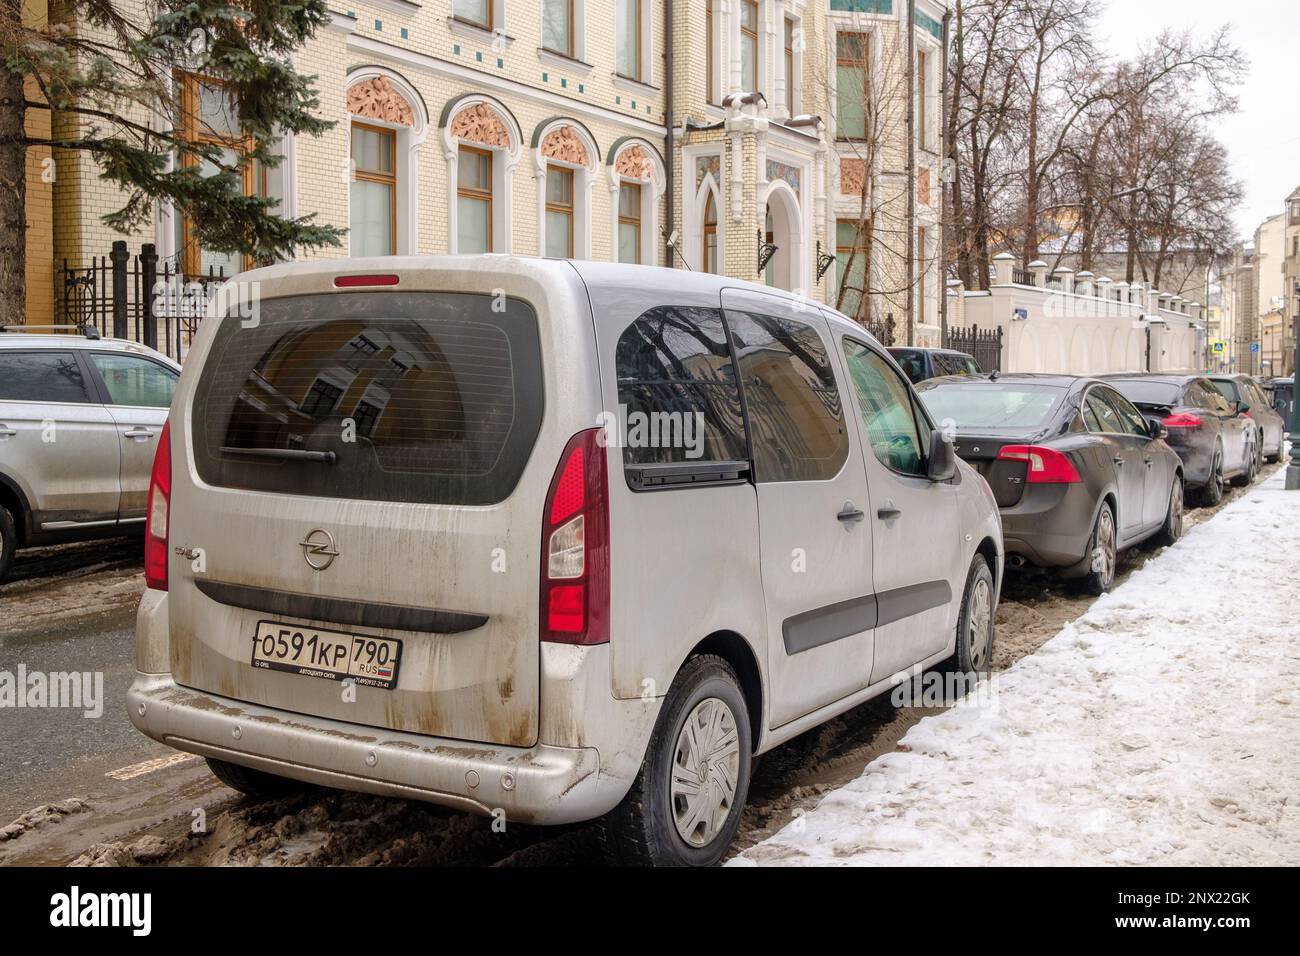 https://c8.alamy.com/comp/2NX22GK/moscow-russia-february-25-2023-an-opel-combo-life-car-is-parked-along-a-snow-covered-sidewalk-in-the-historic-city-center-on-a-cloudy-winter-day-2NX22GK.jpg